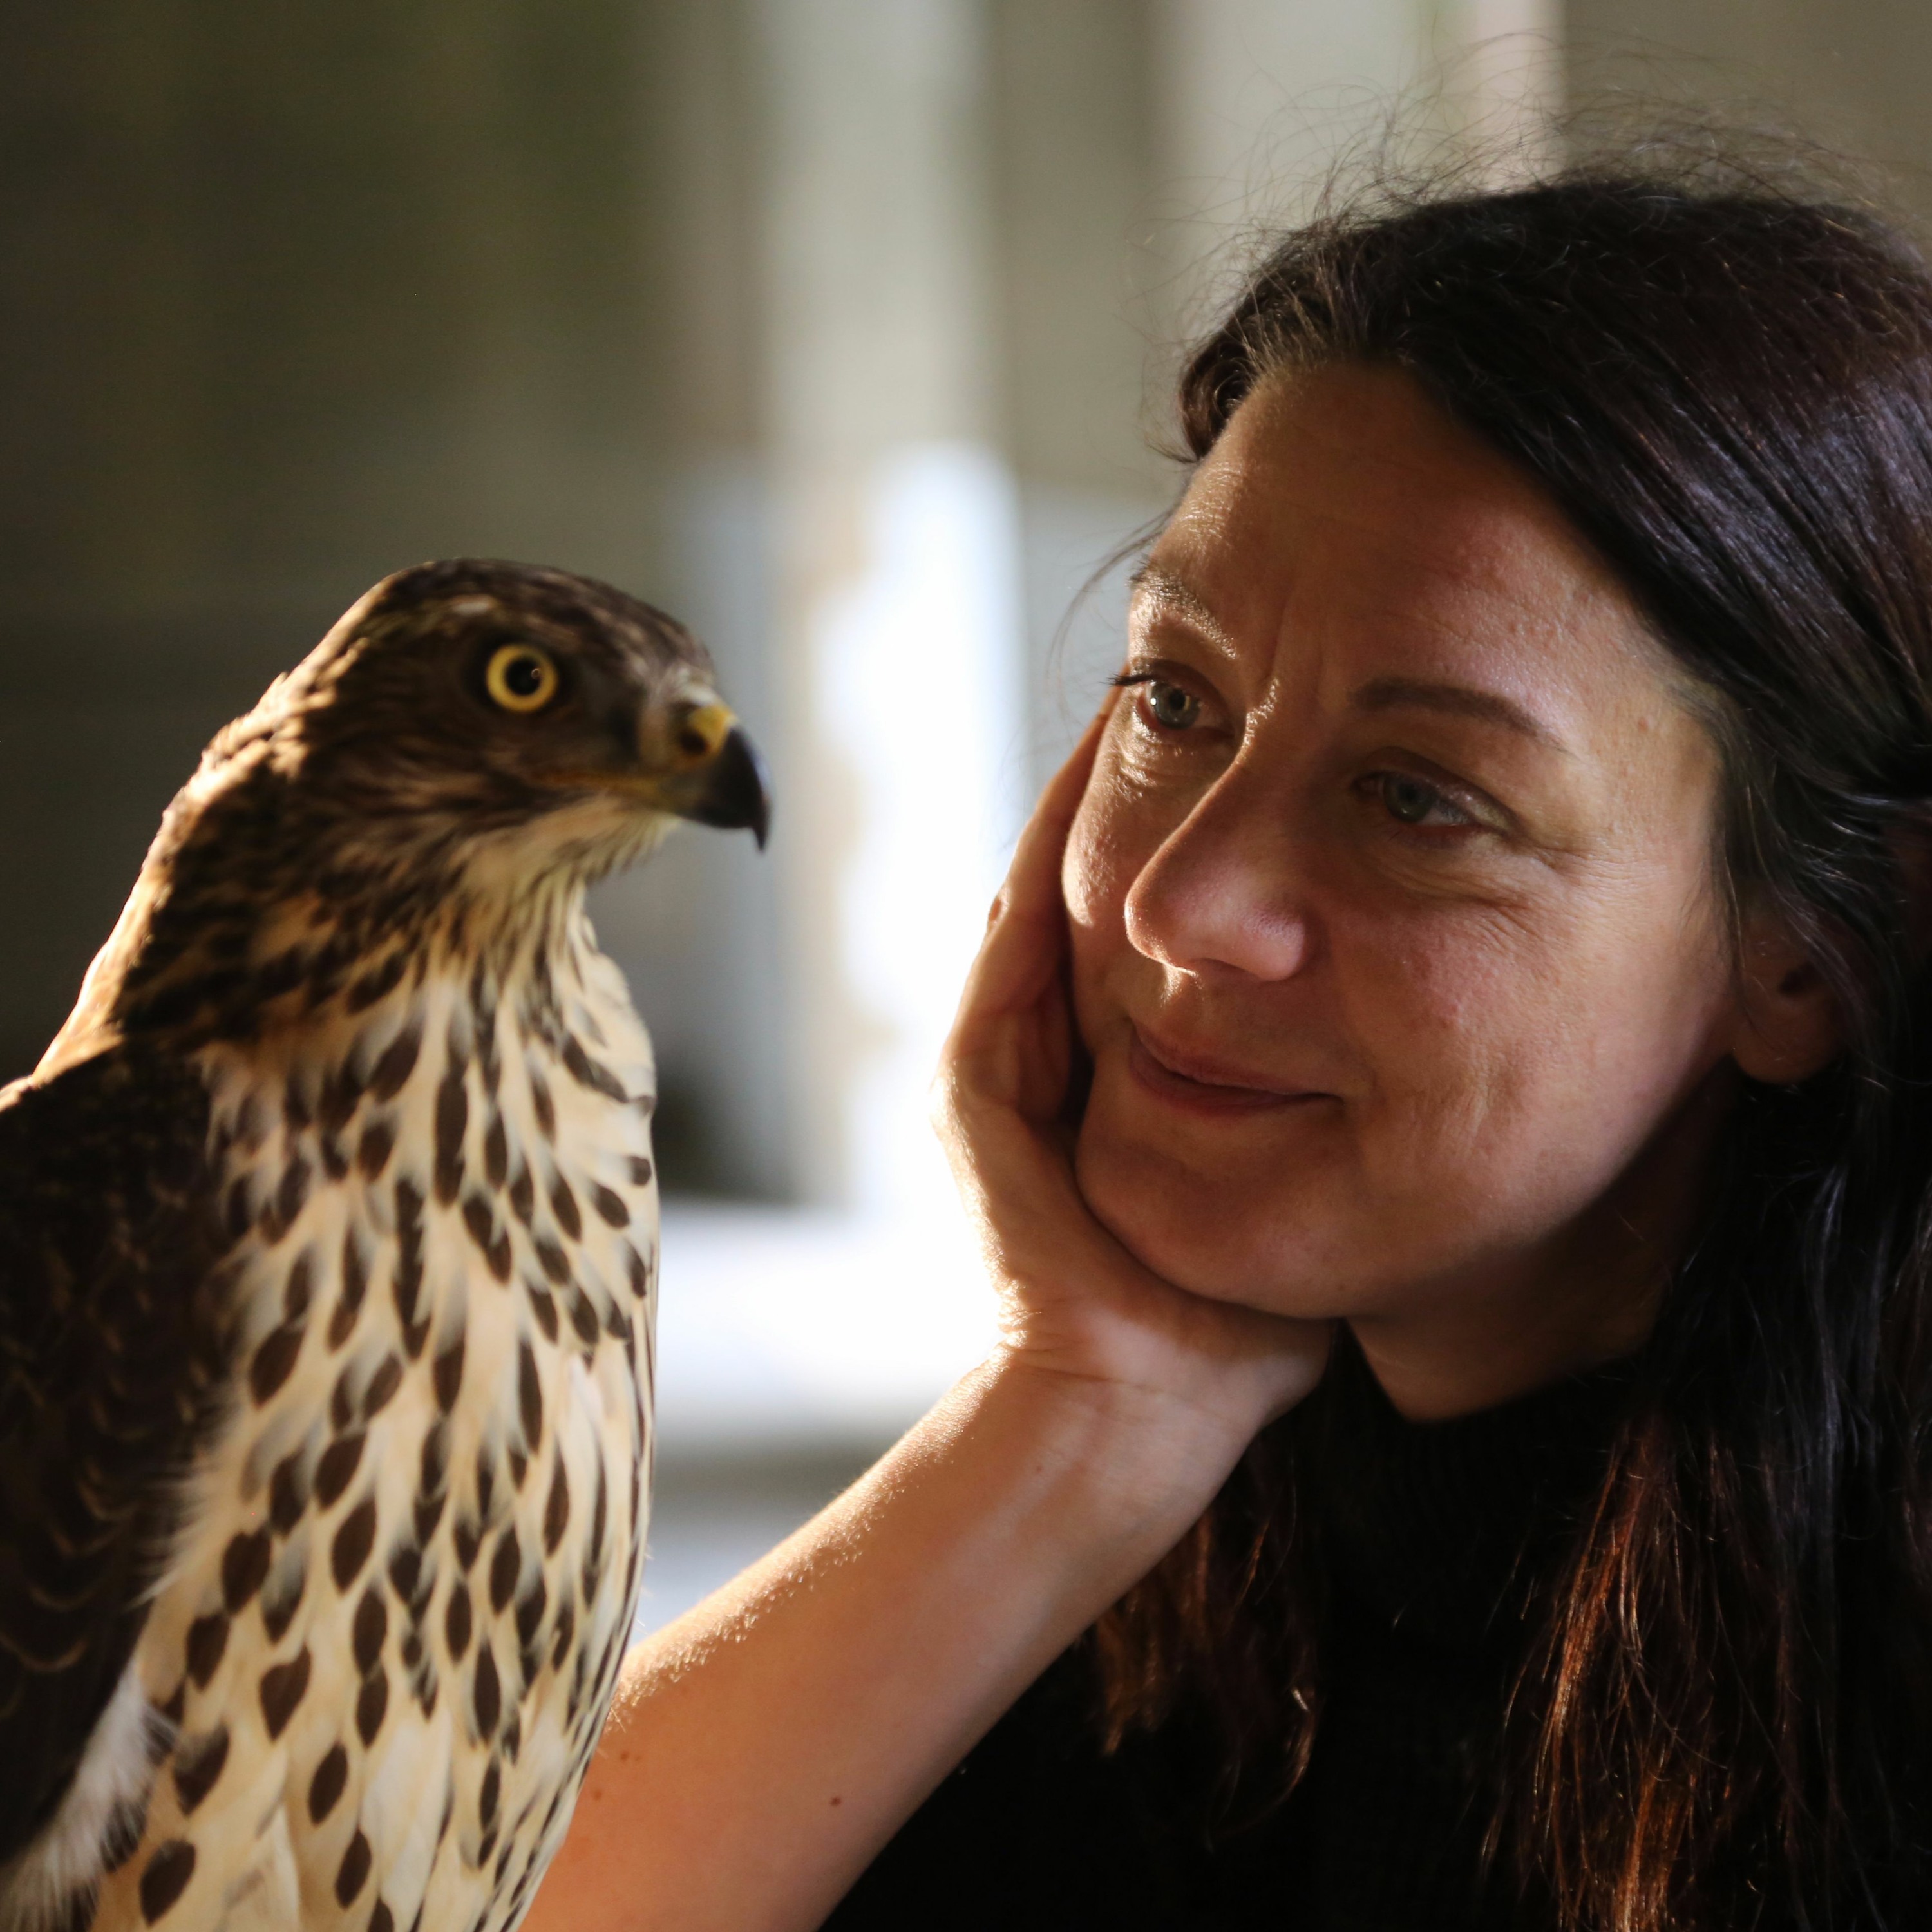 Author Helen Macdonald on ”H is for Hawk: A New Chapter”